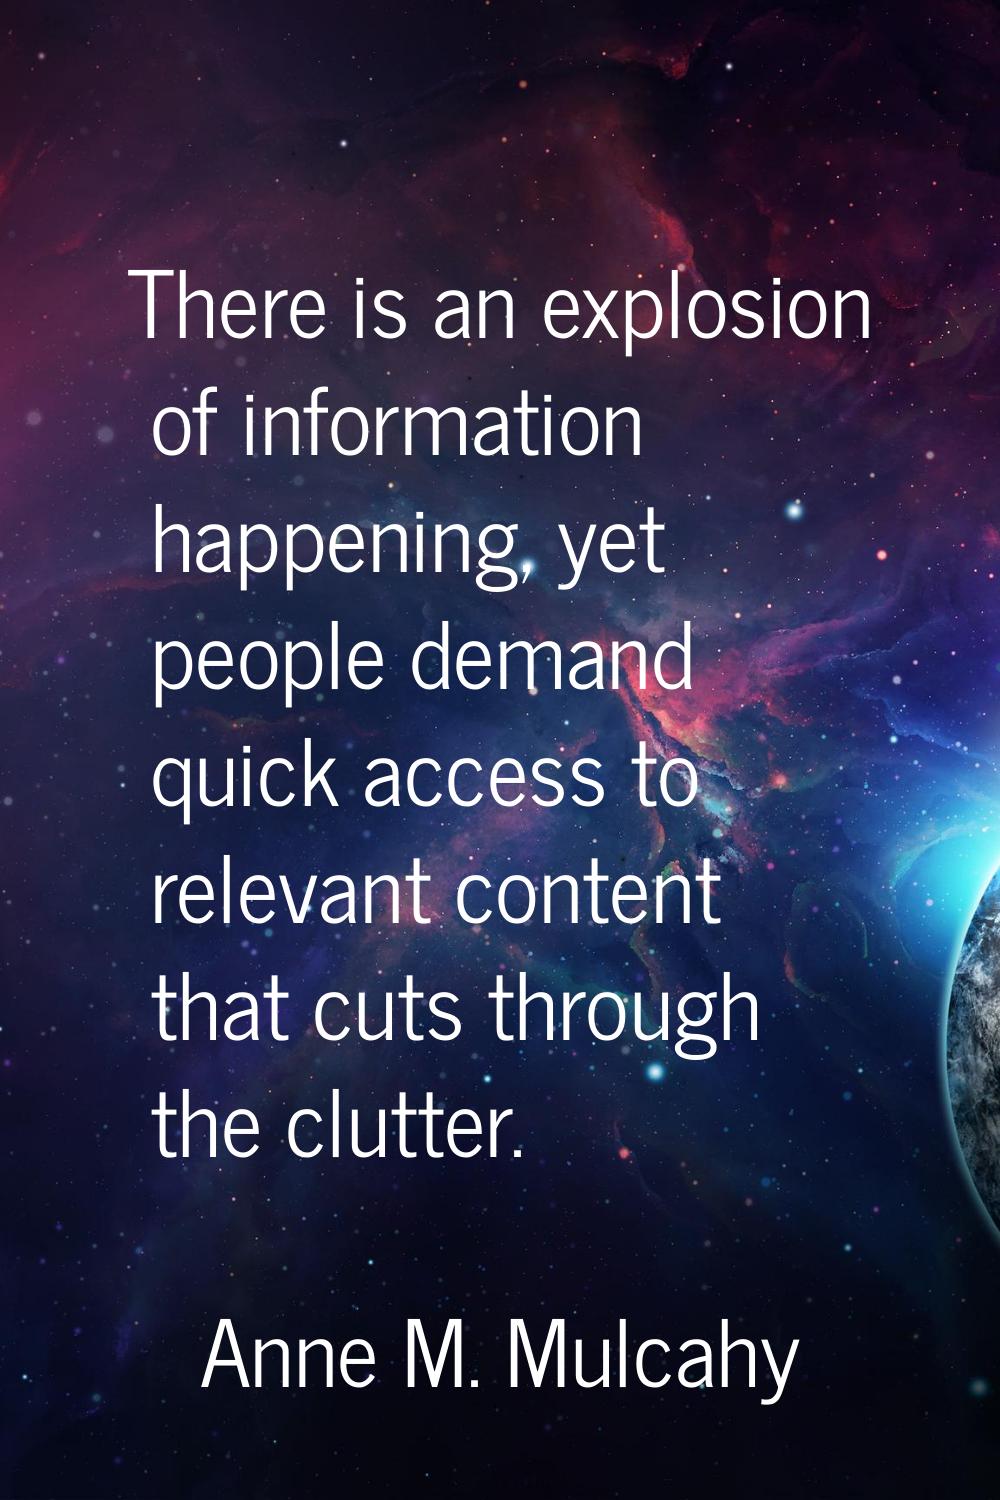 There is an explosion of information happening, yet people demand quick access to relevant content 